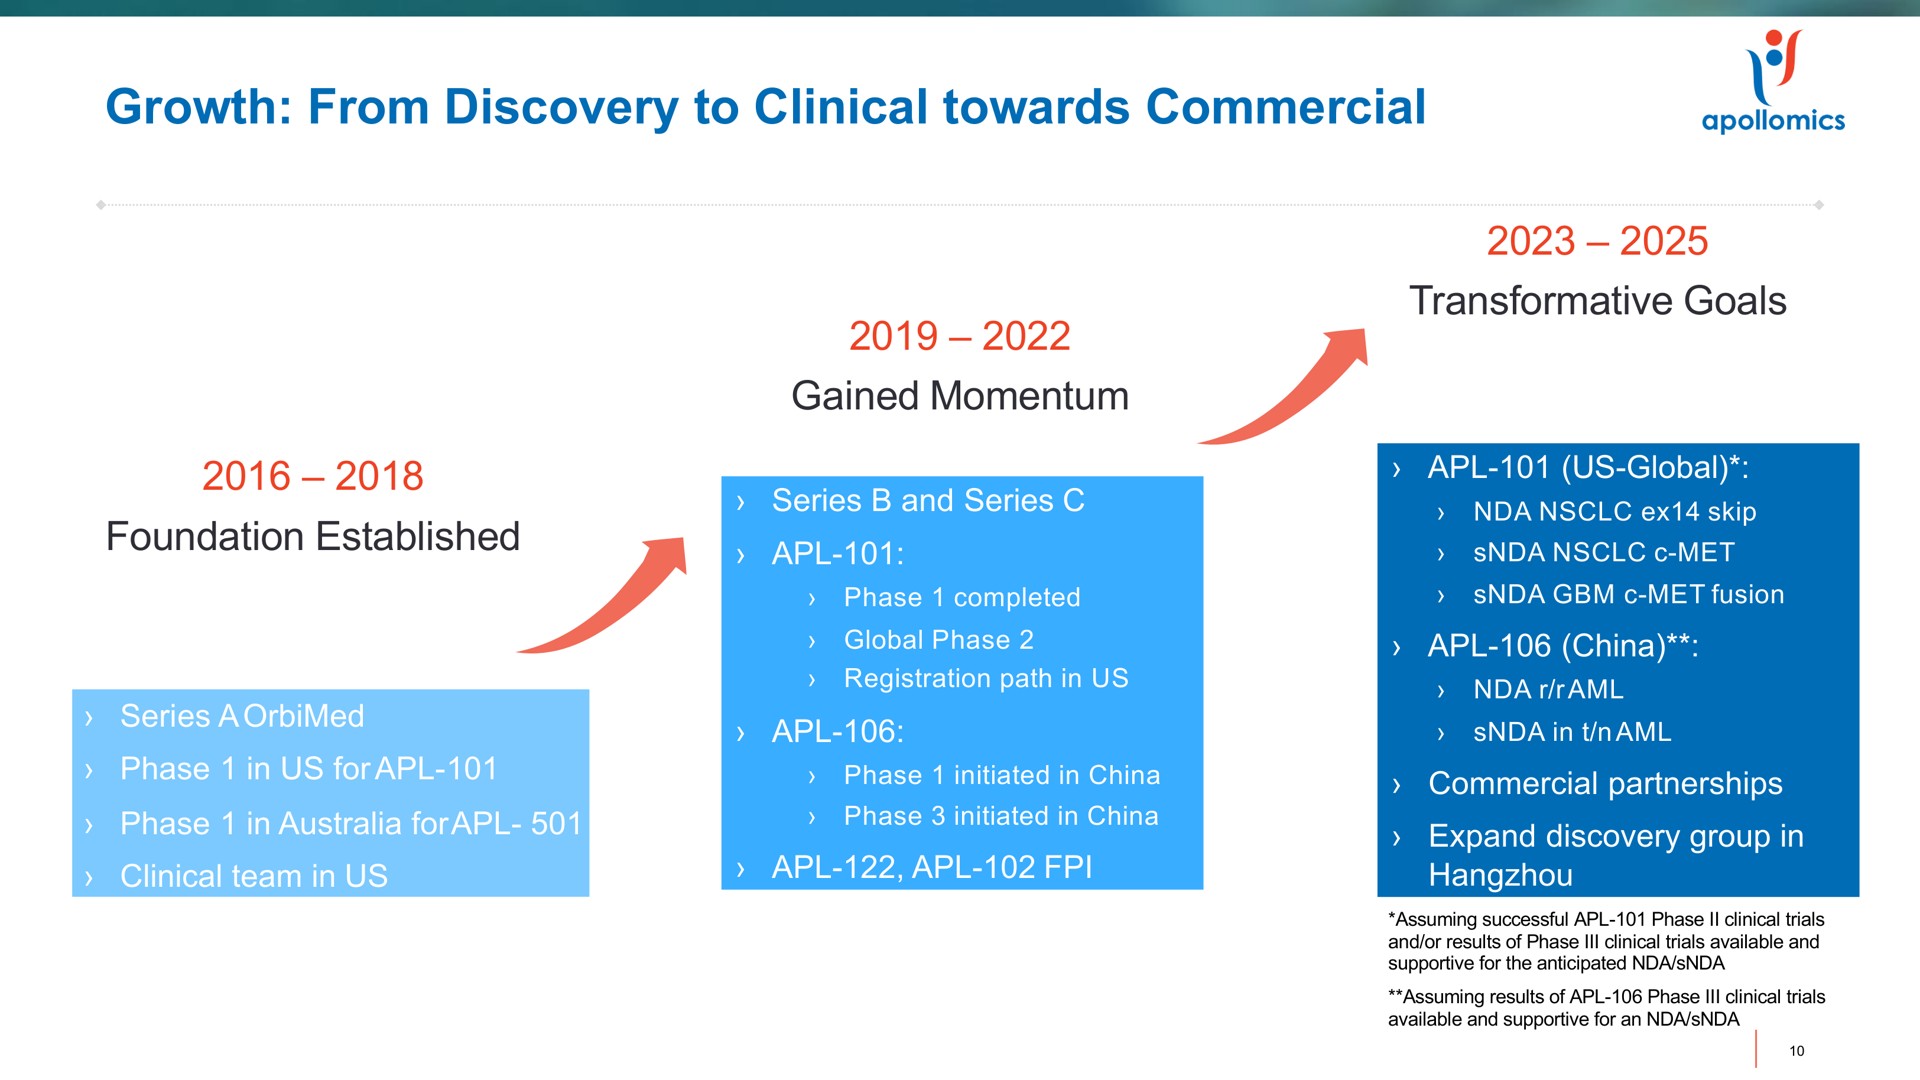 growth from discovery to clinical towards commercial gained momentum | Apollomics